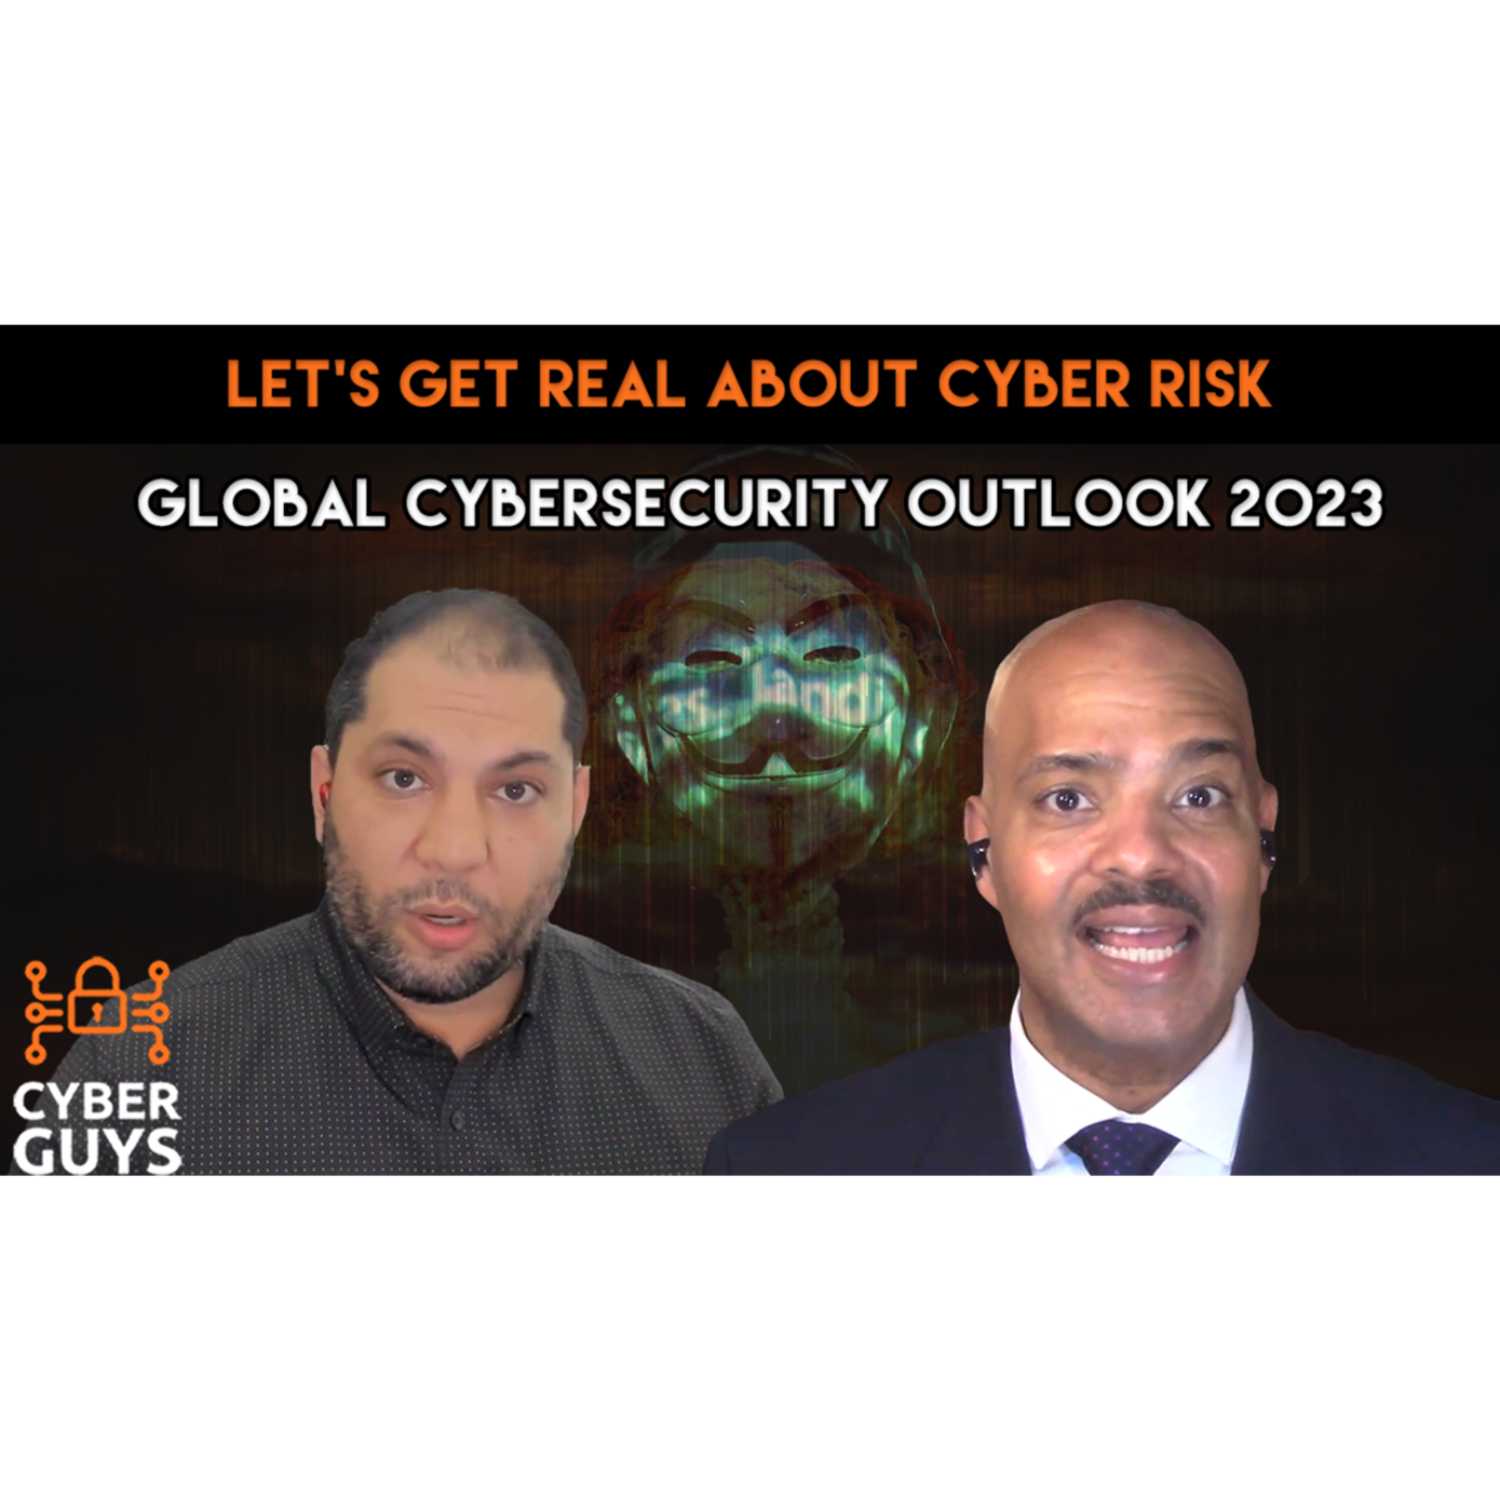 Let's Get Real About Cyber Risk